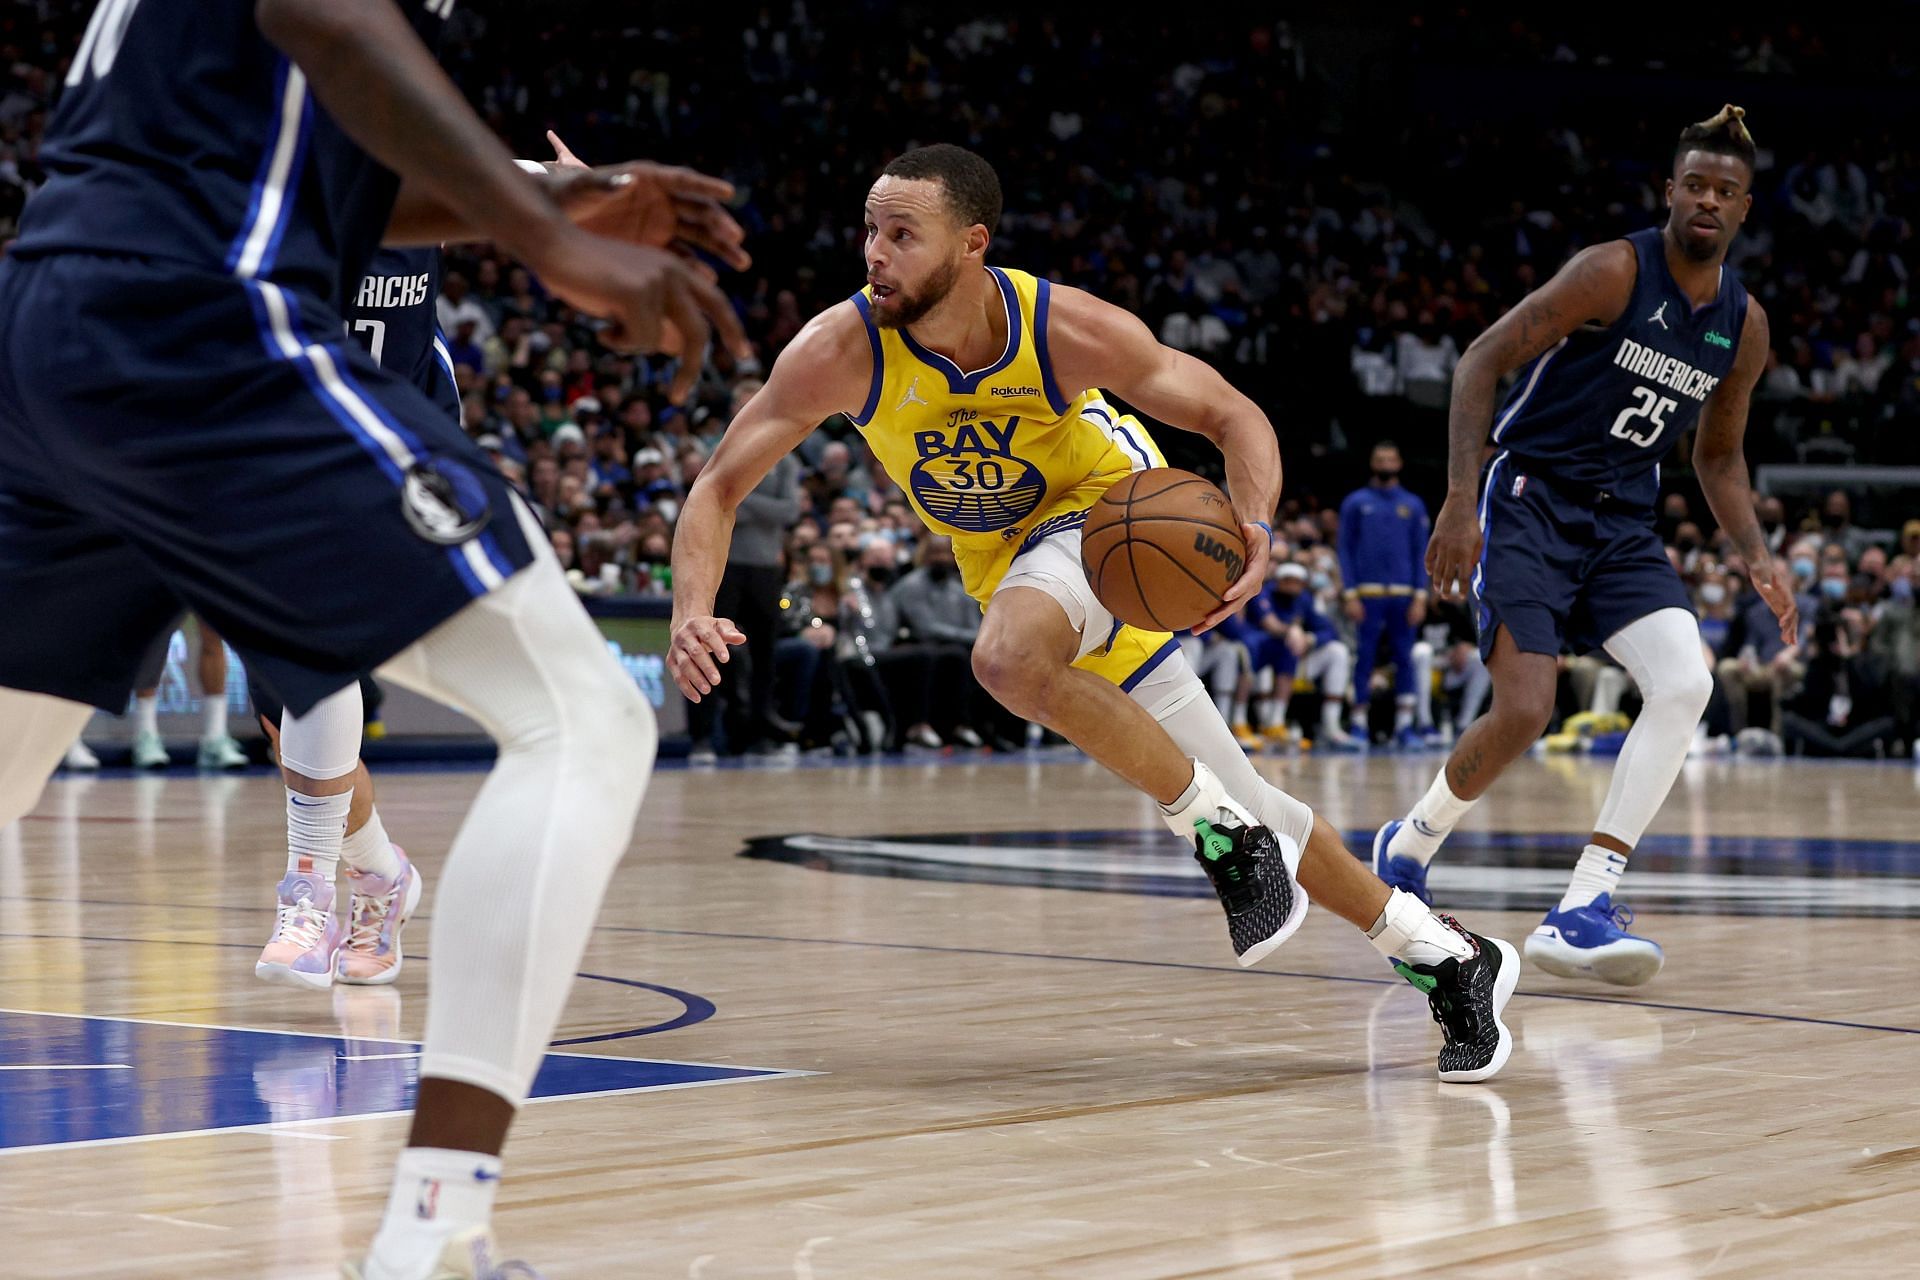 "I'm not optimistic, but we'll see" Steph Curry gives an update on